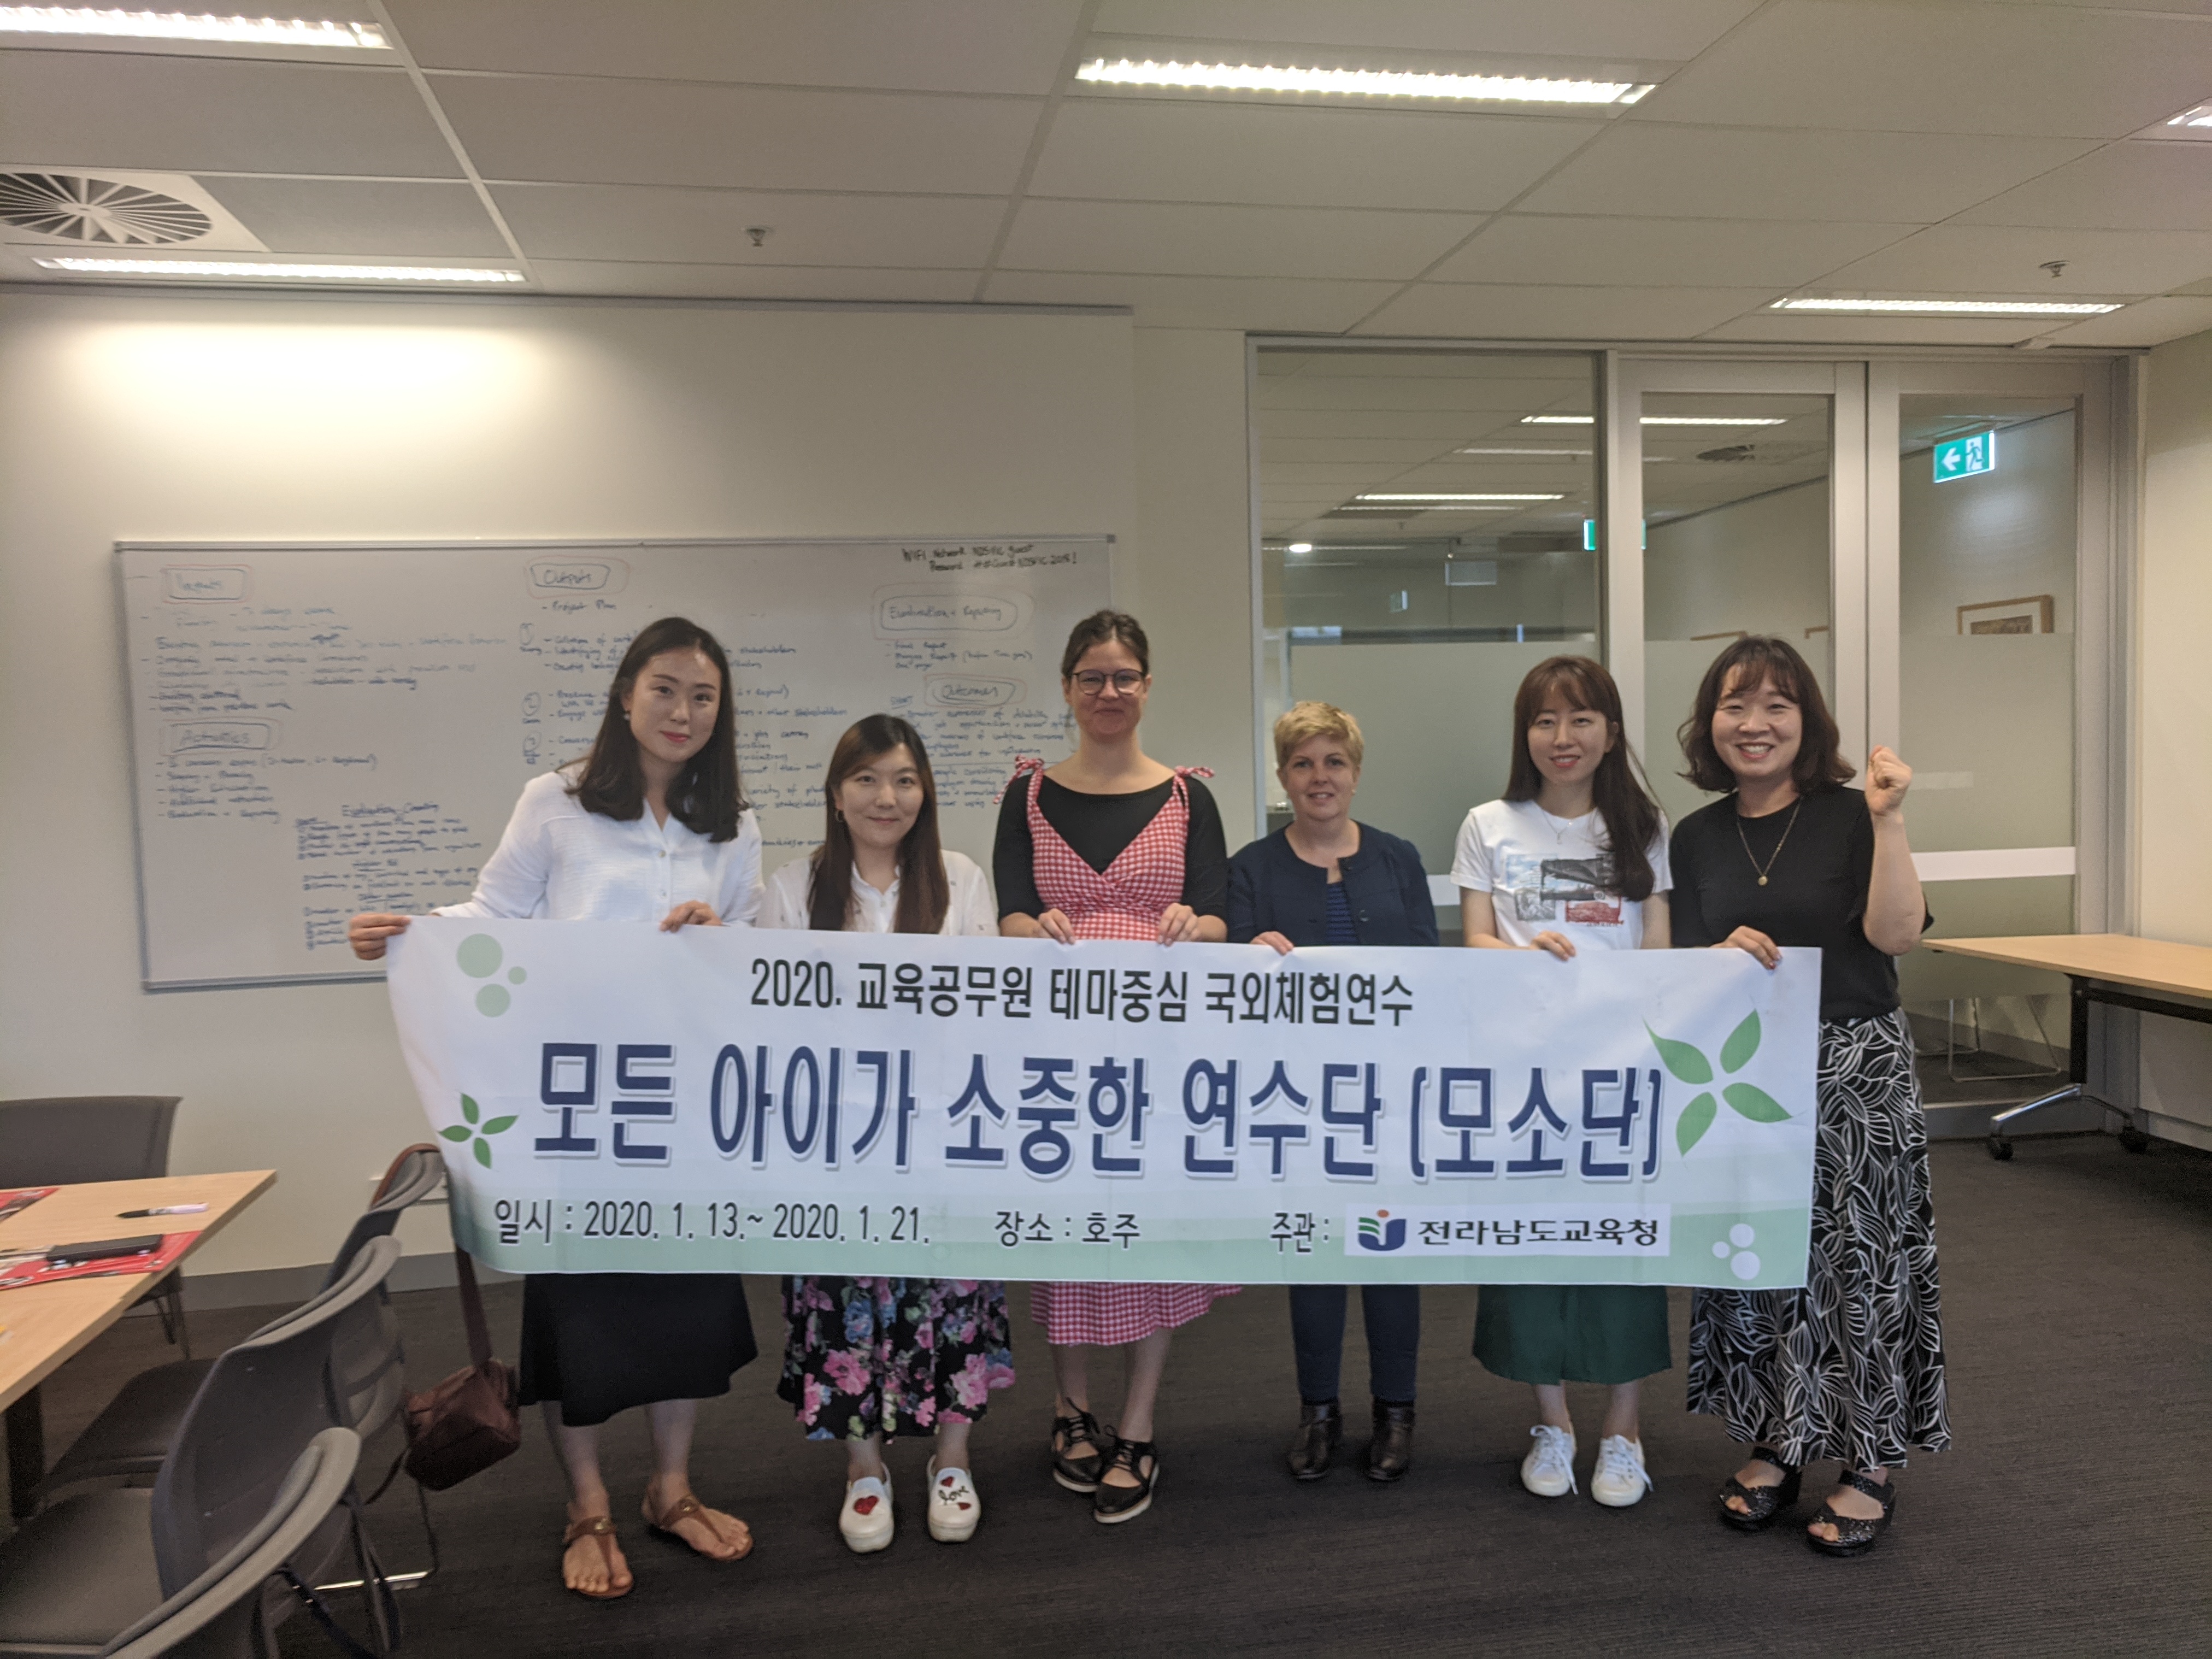 group of ladies holding a banner in Korean in a office